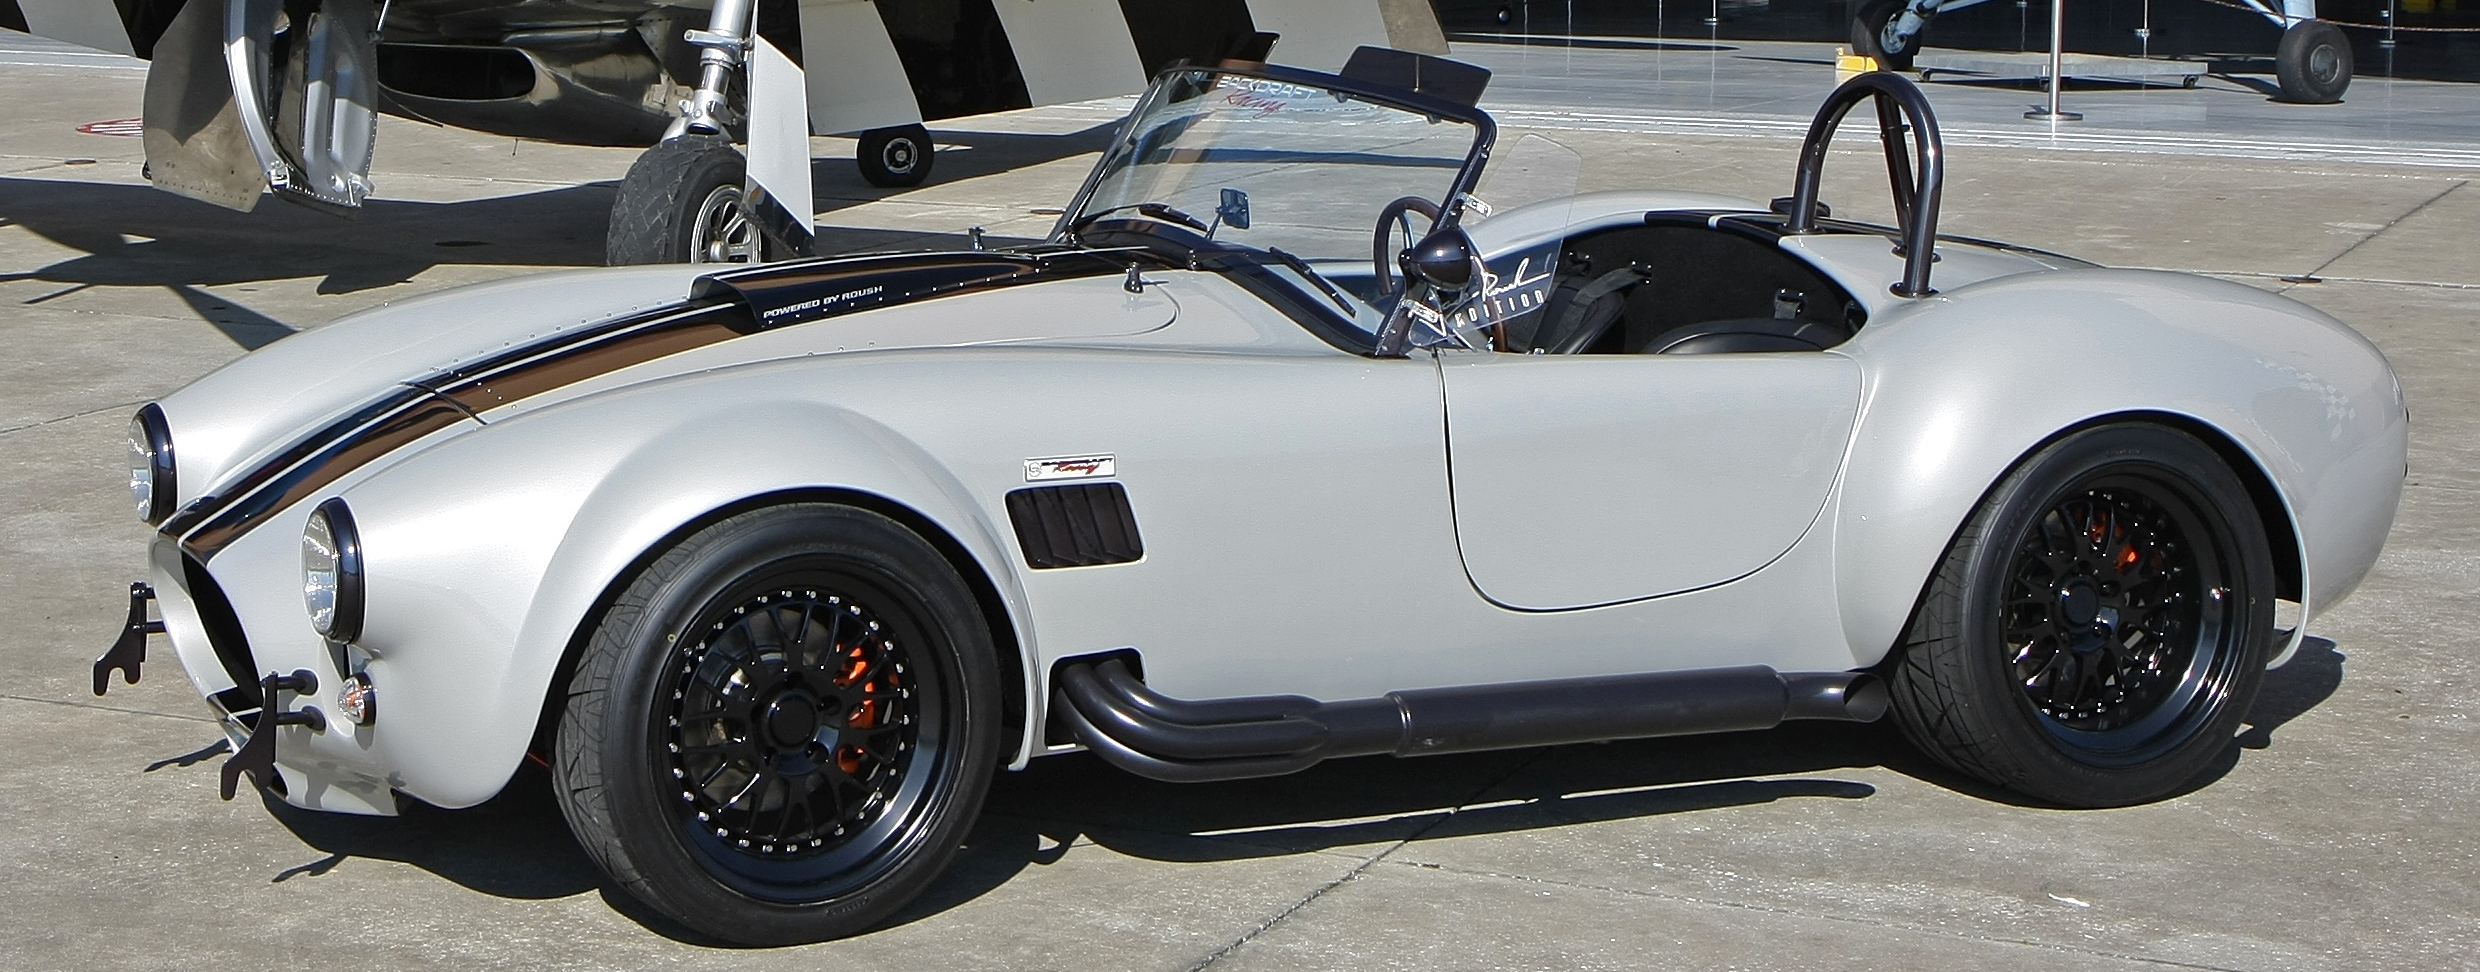 Visitors to the Scott Bader stand will see a stunning Cobra Shelby supercar with a composite body built using Scott Bader resins, gelcoats and adhesives.